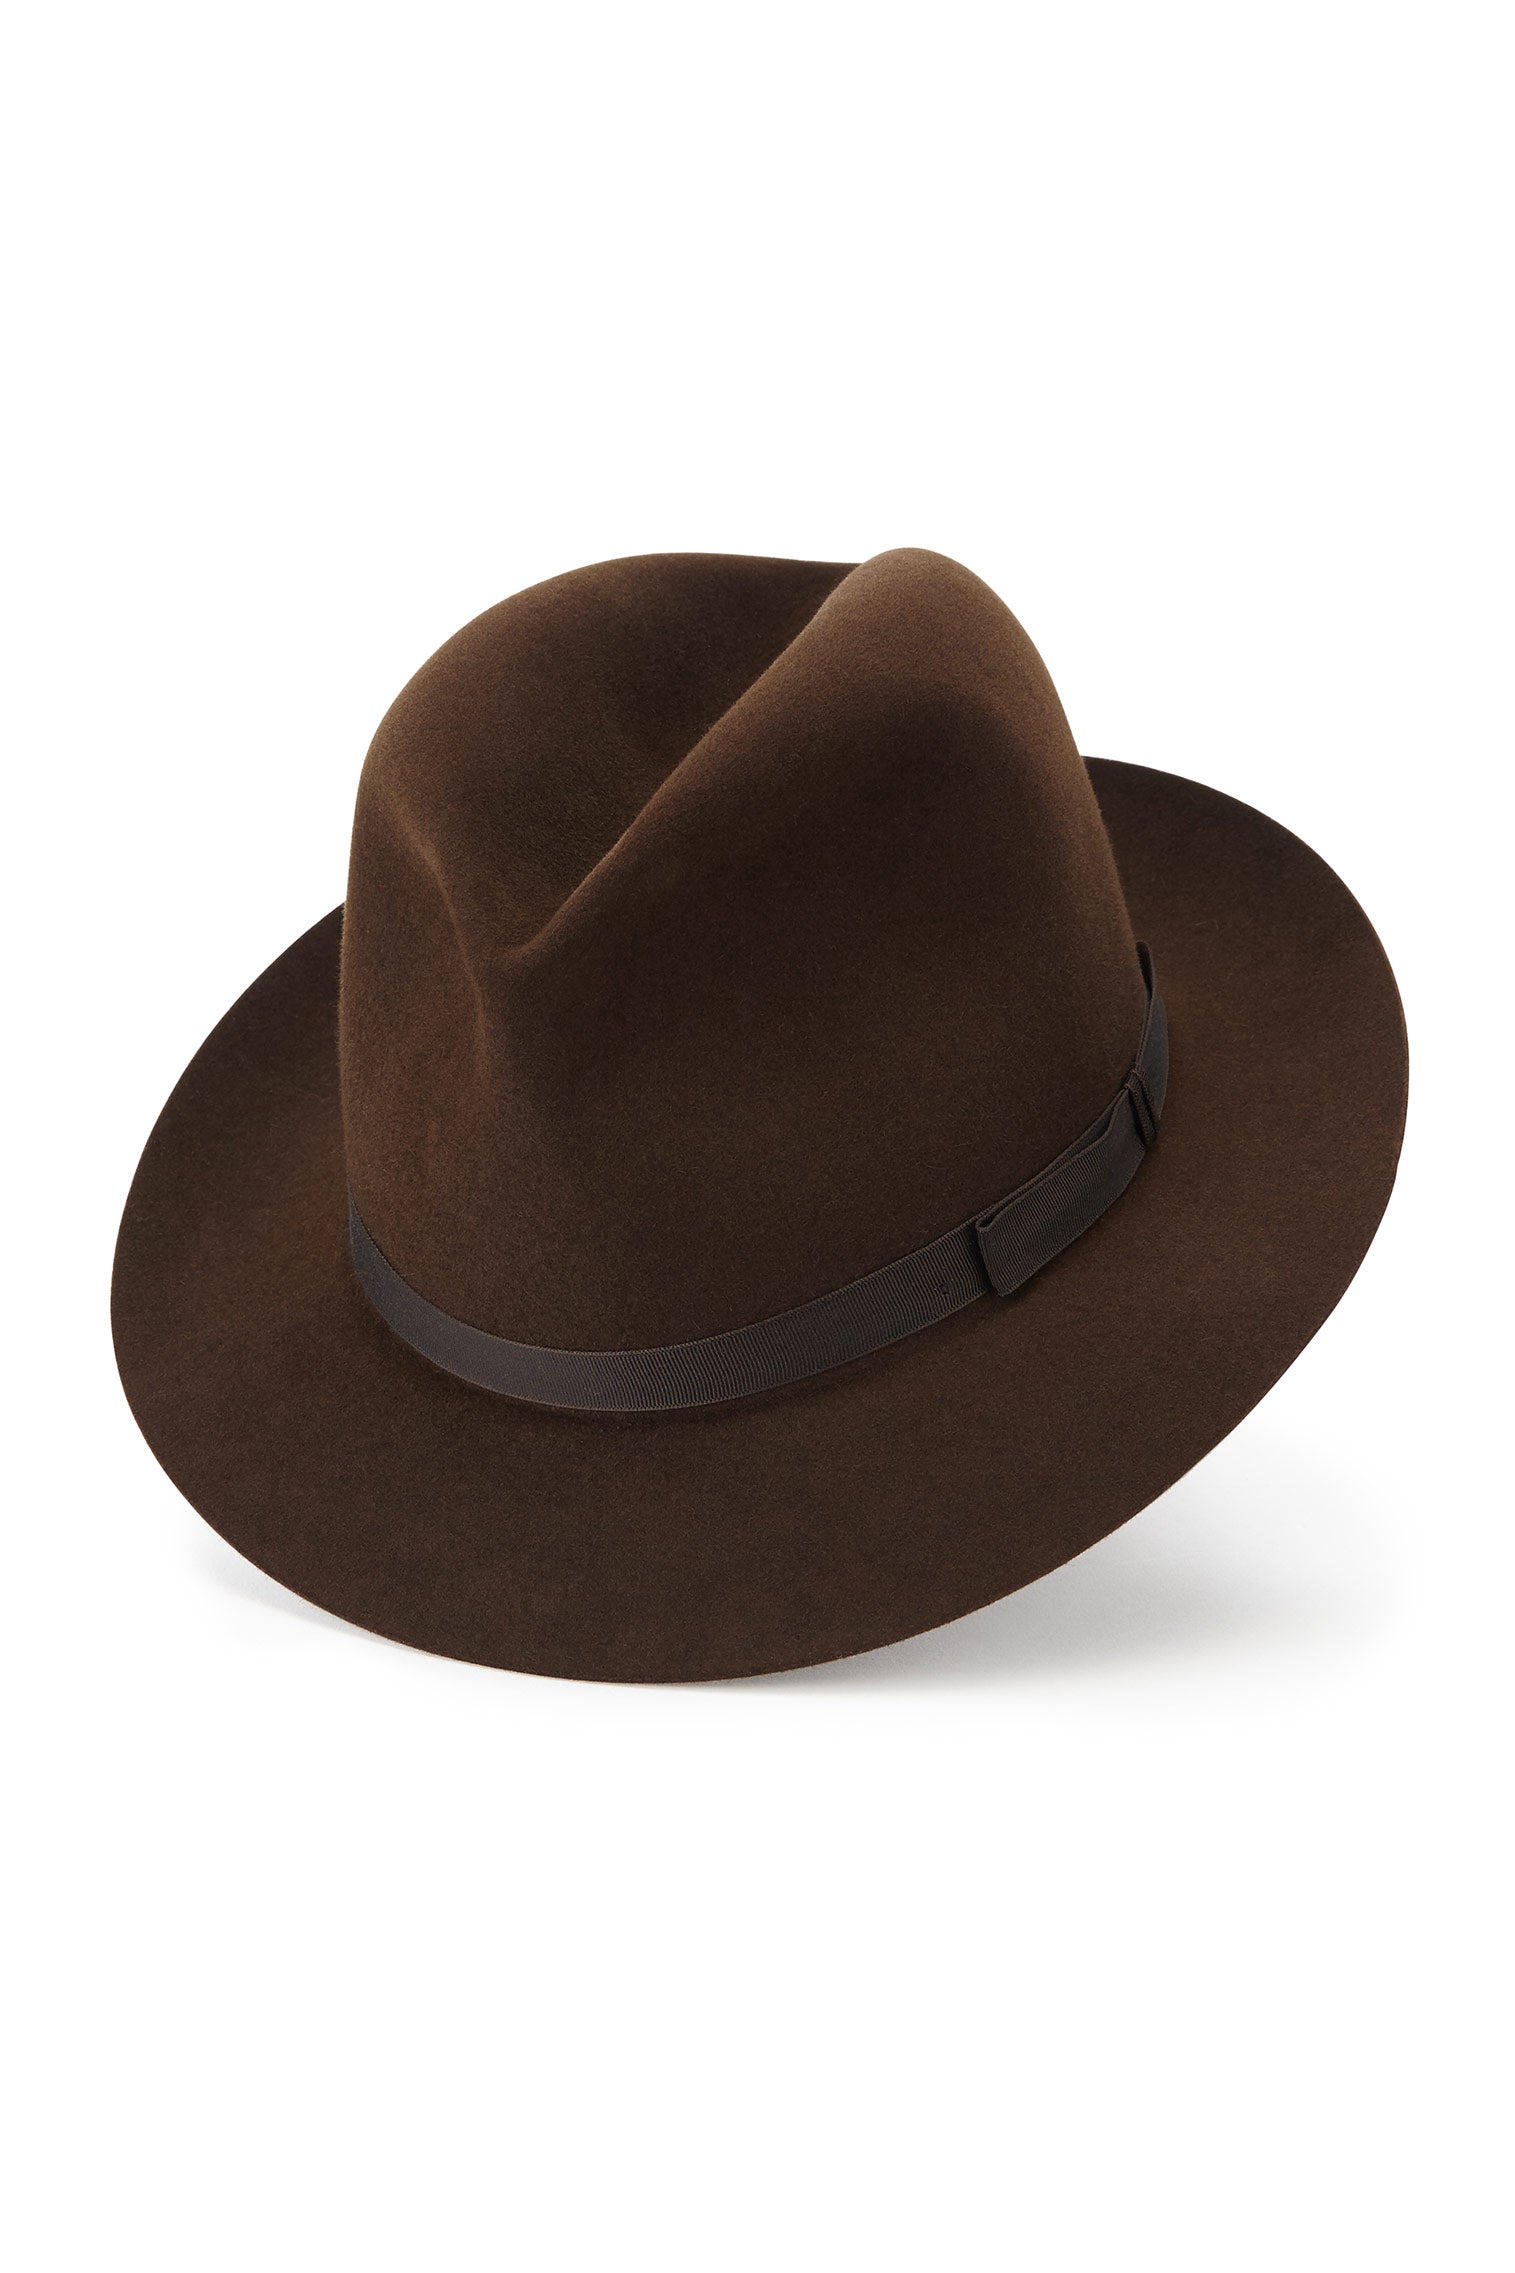 Wetherby Trilby - Hats for Oval Face Shapes - Lock & Co. Hatters London UK